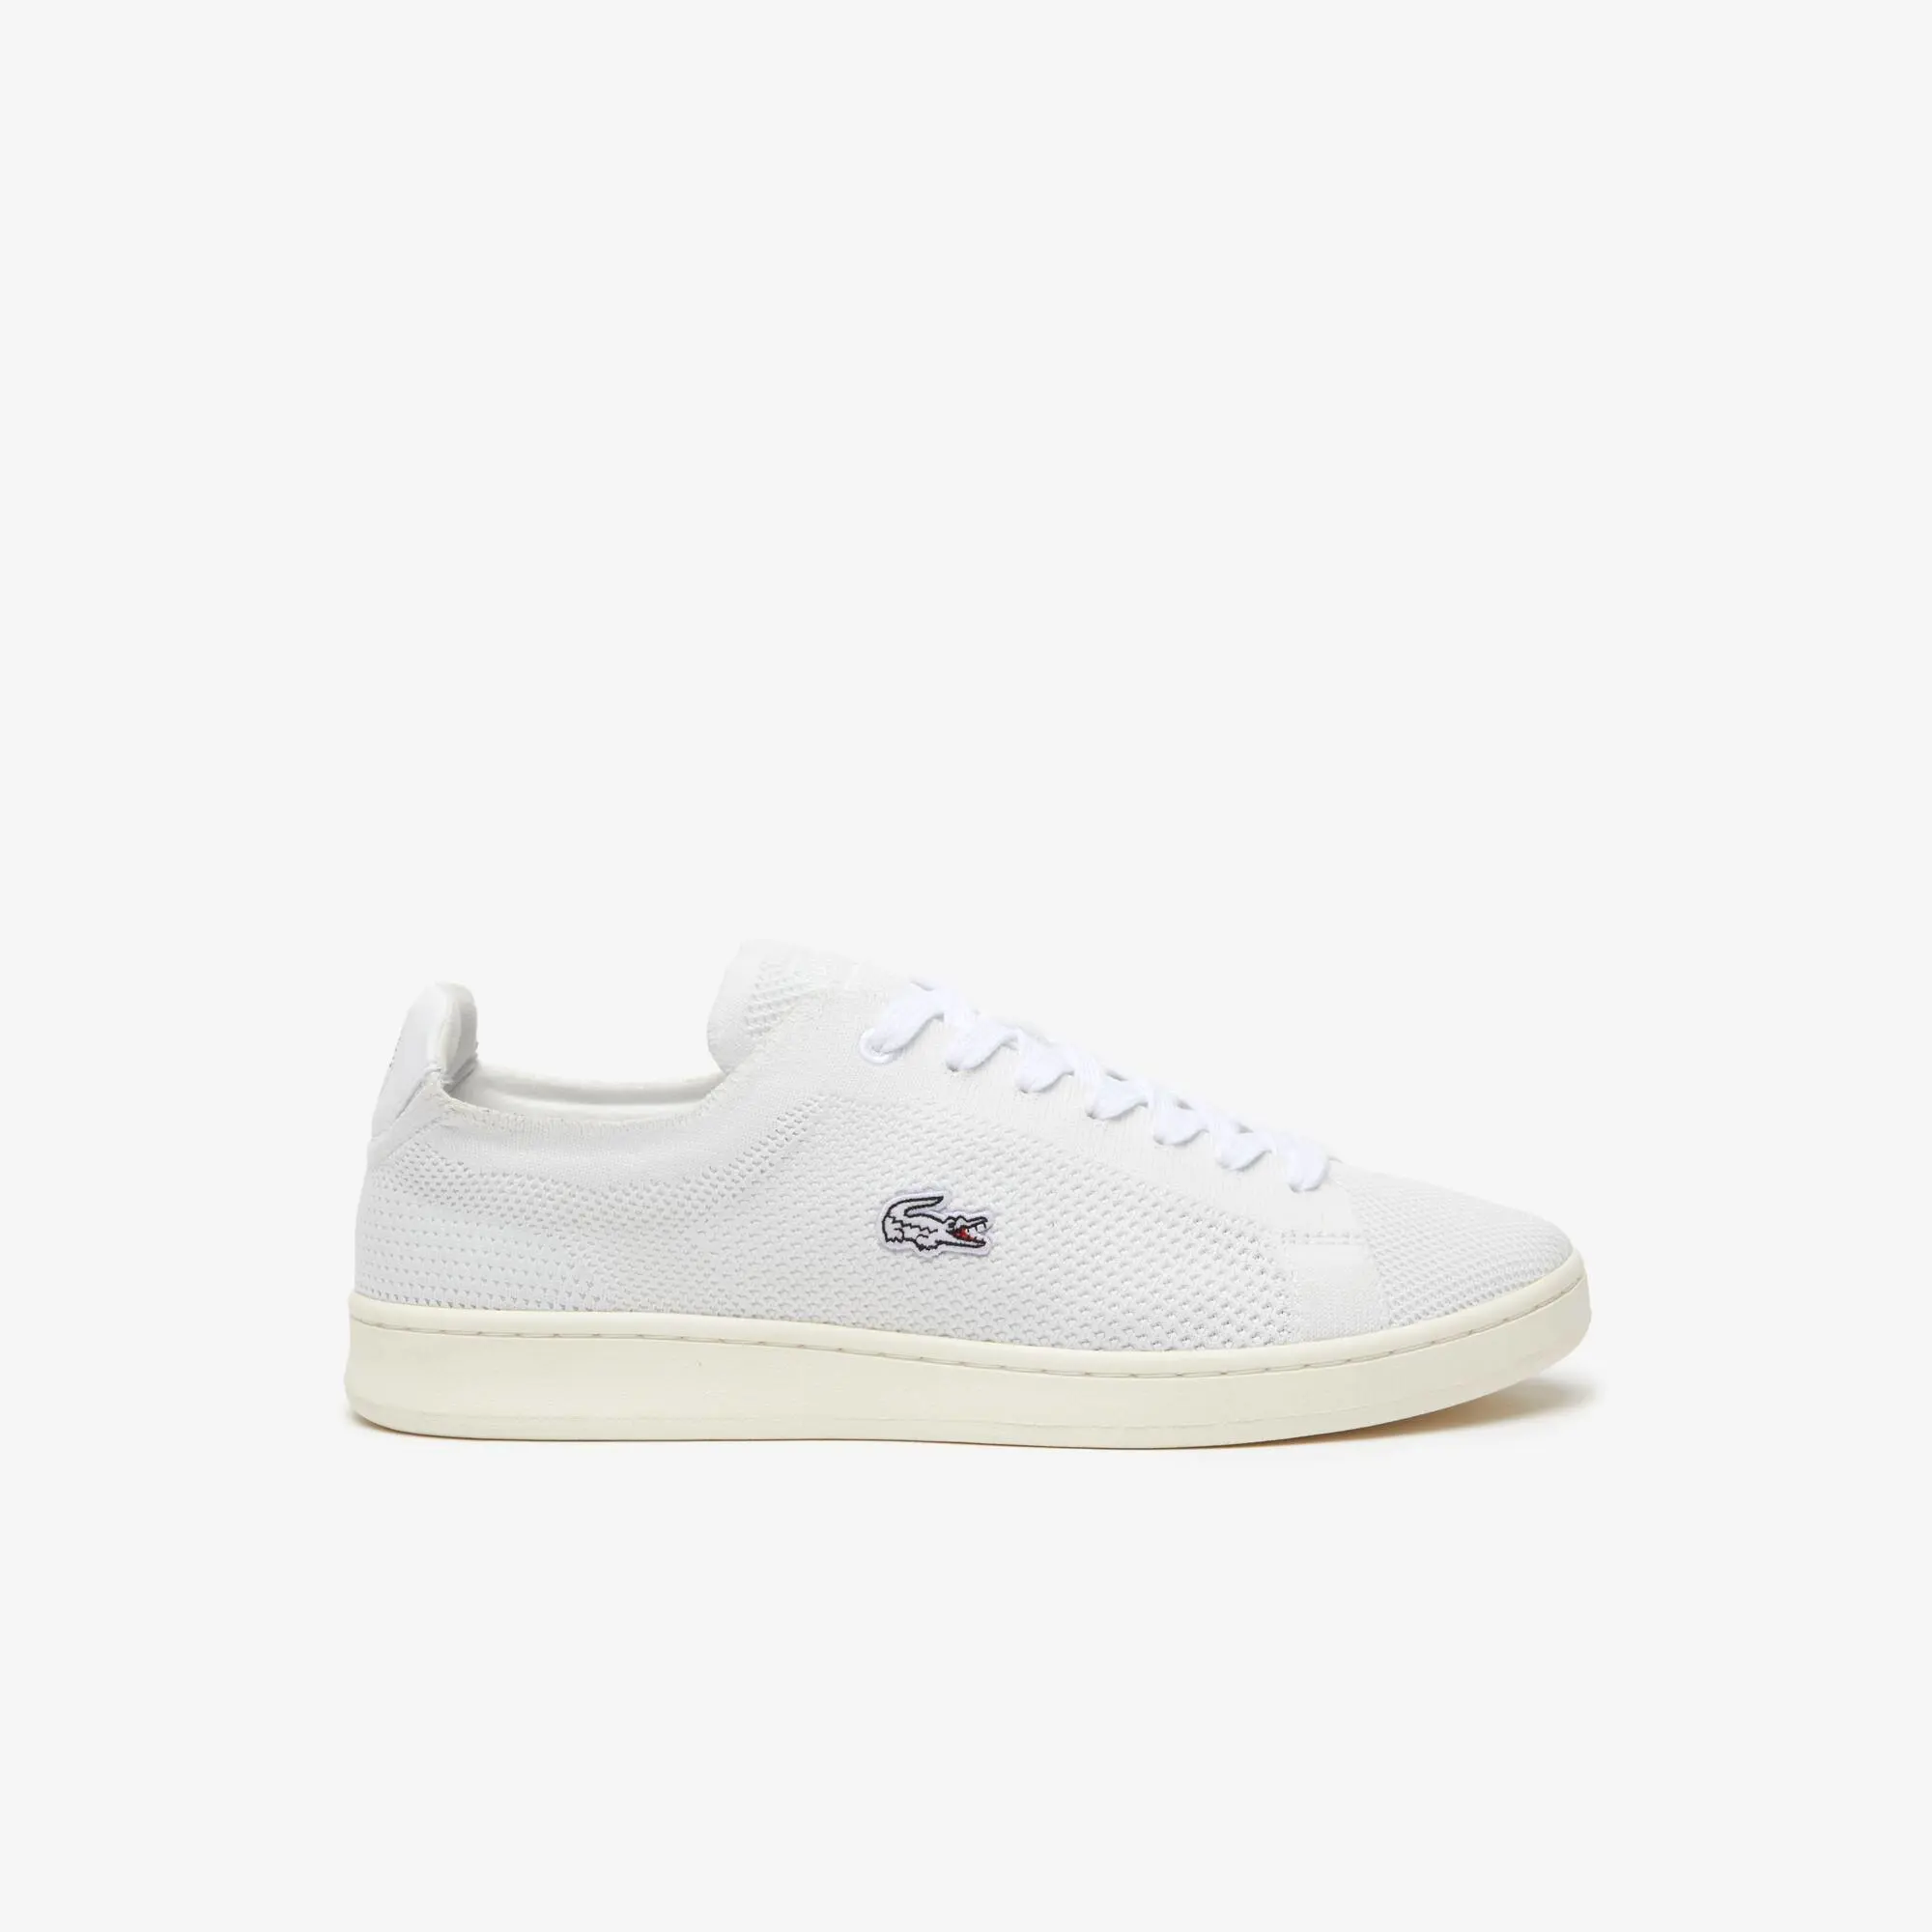 Lacoste Herren LACOSTE French Open Sneakers Carnaby Piquée aus Textil. 1